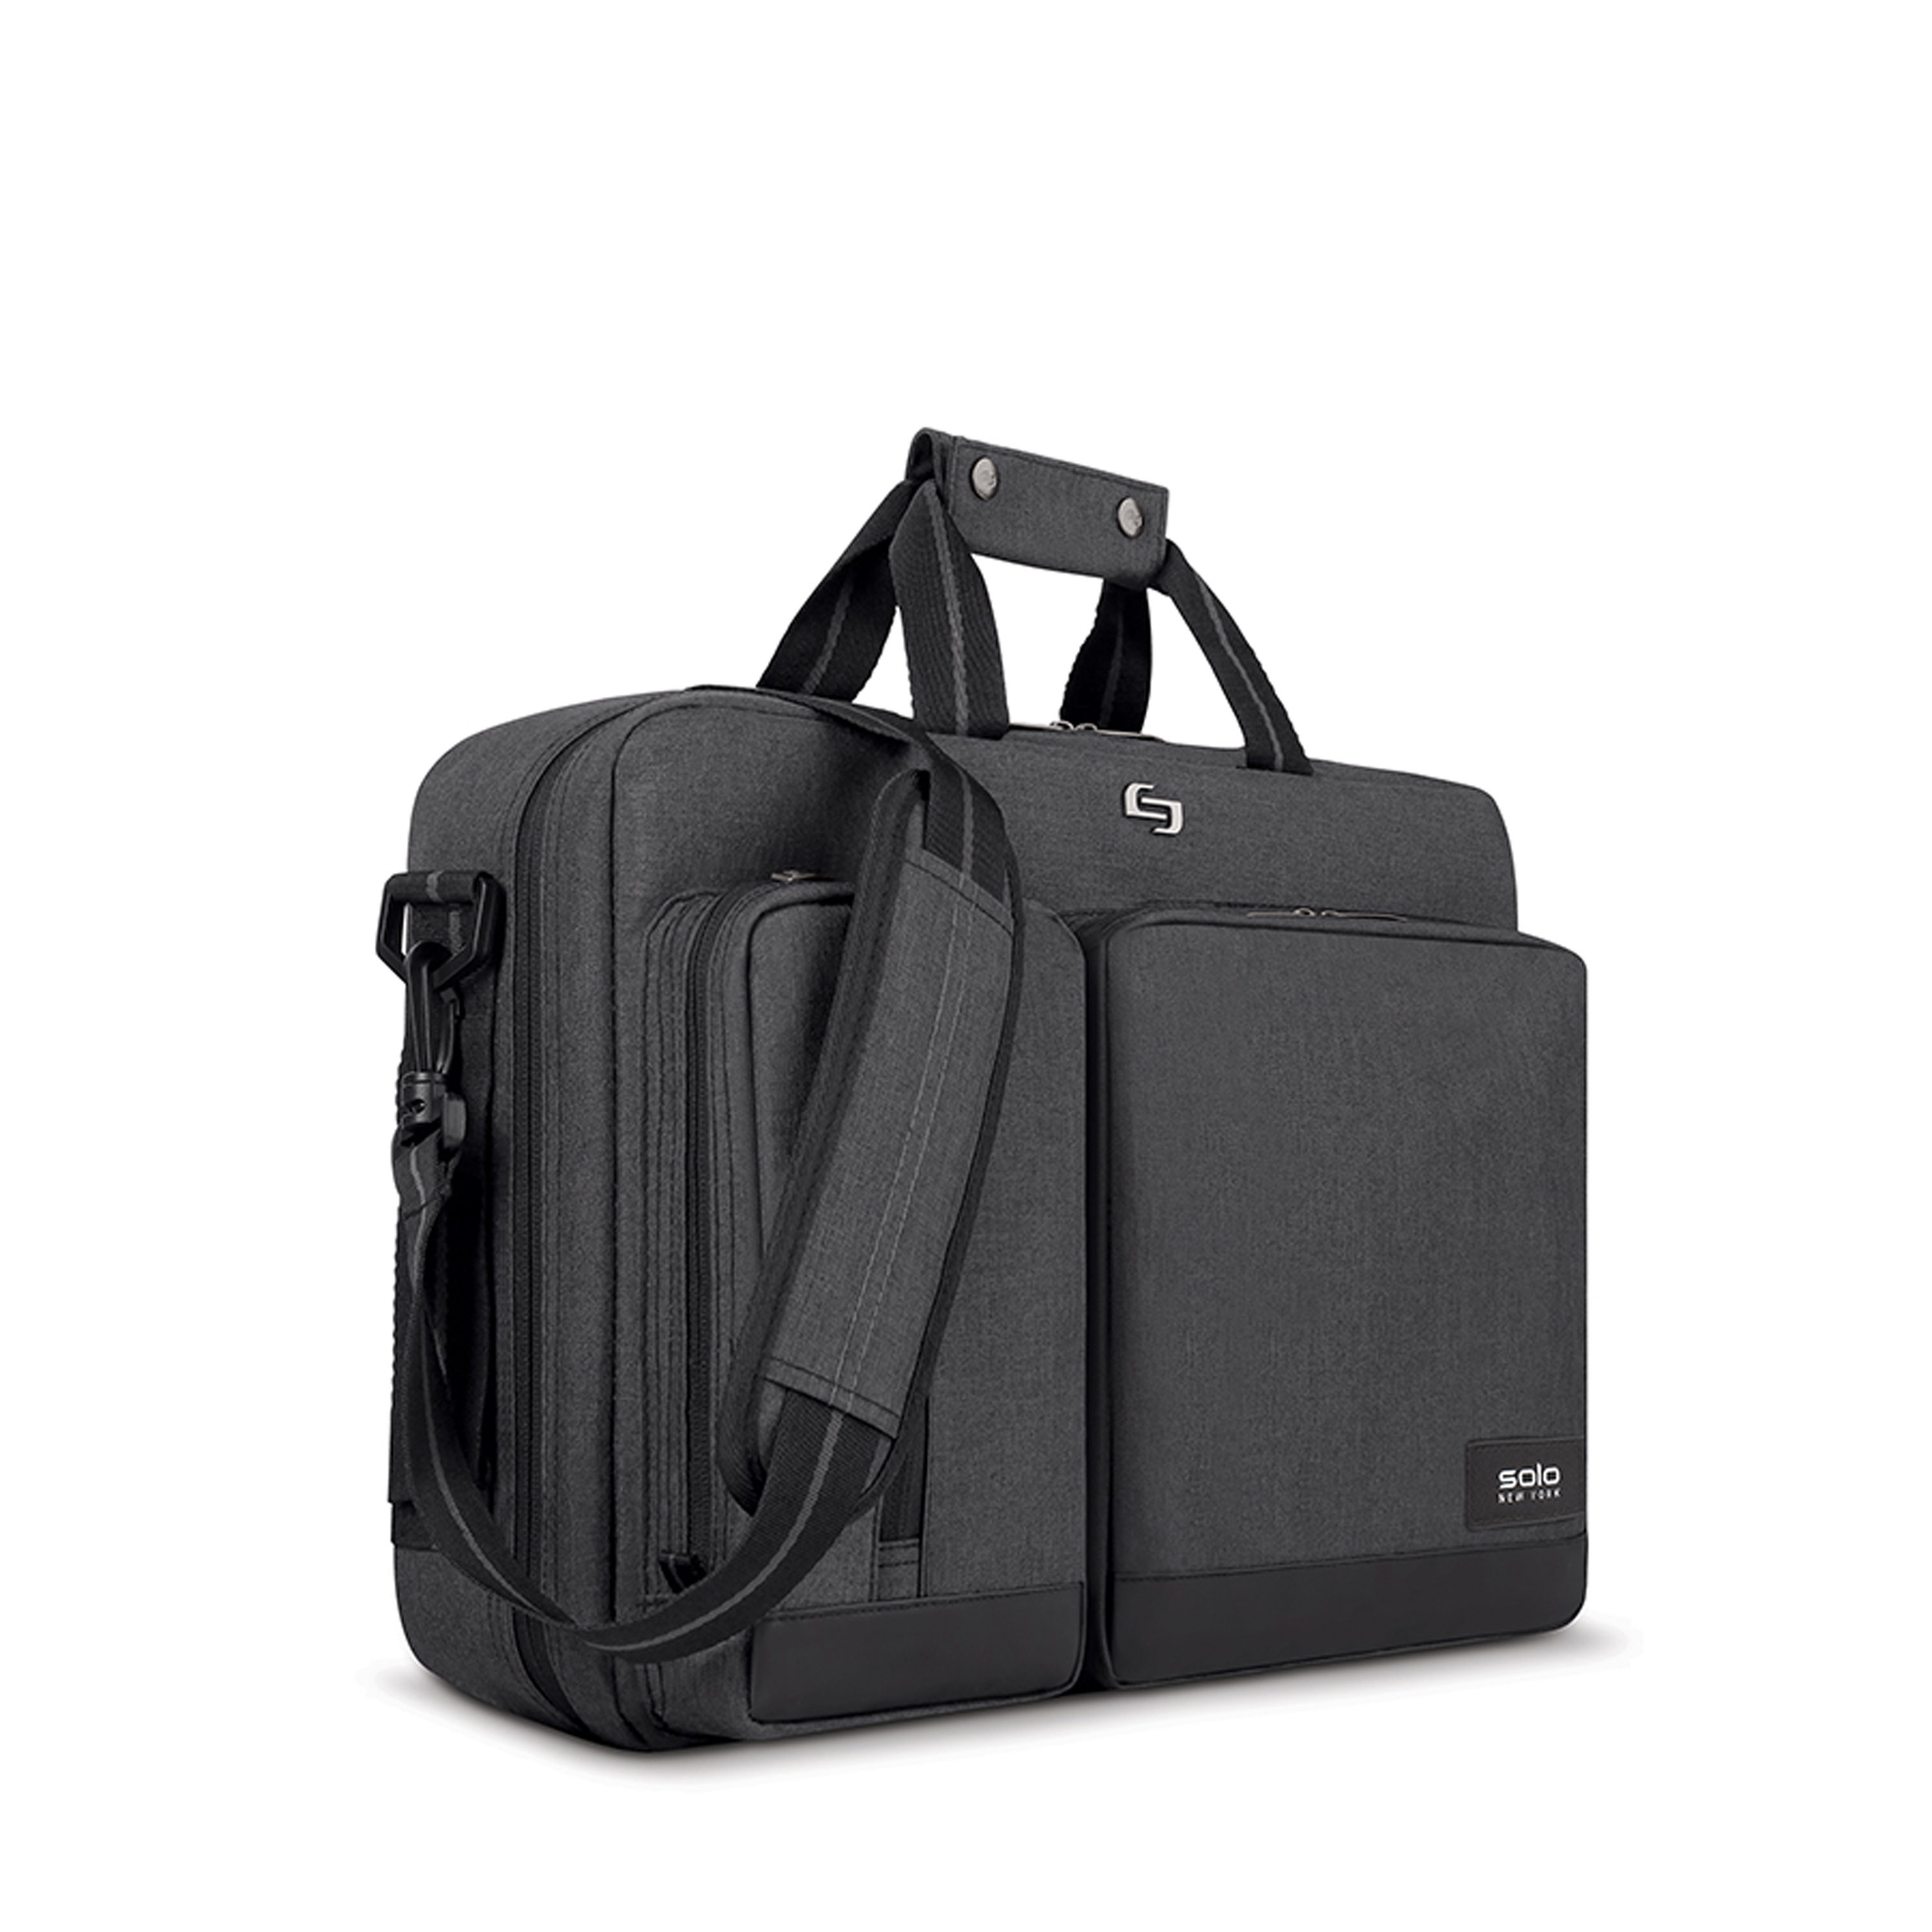 Solo New York Duane Hybrid Briefcase Backpack, Gray, Laptop Tote - image 5 of 22